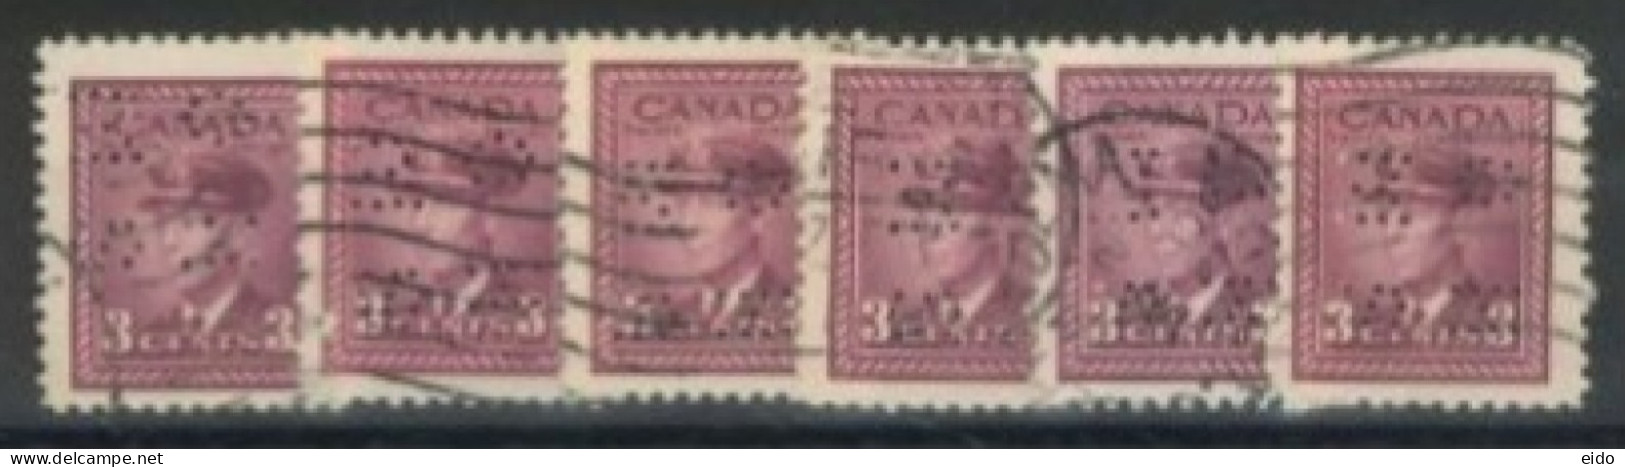 CANADA - 1942, KING GEORGE VI IN NAVAL UNIFORM STAMPS QTY. OF 6, WITH REDUCED SPECIAL PRICE, USED. - Usados